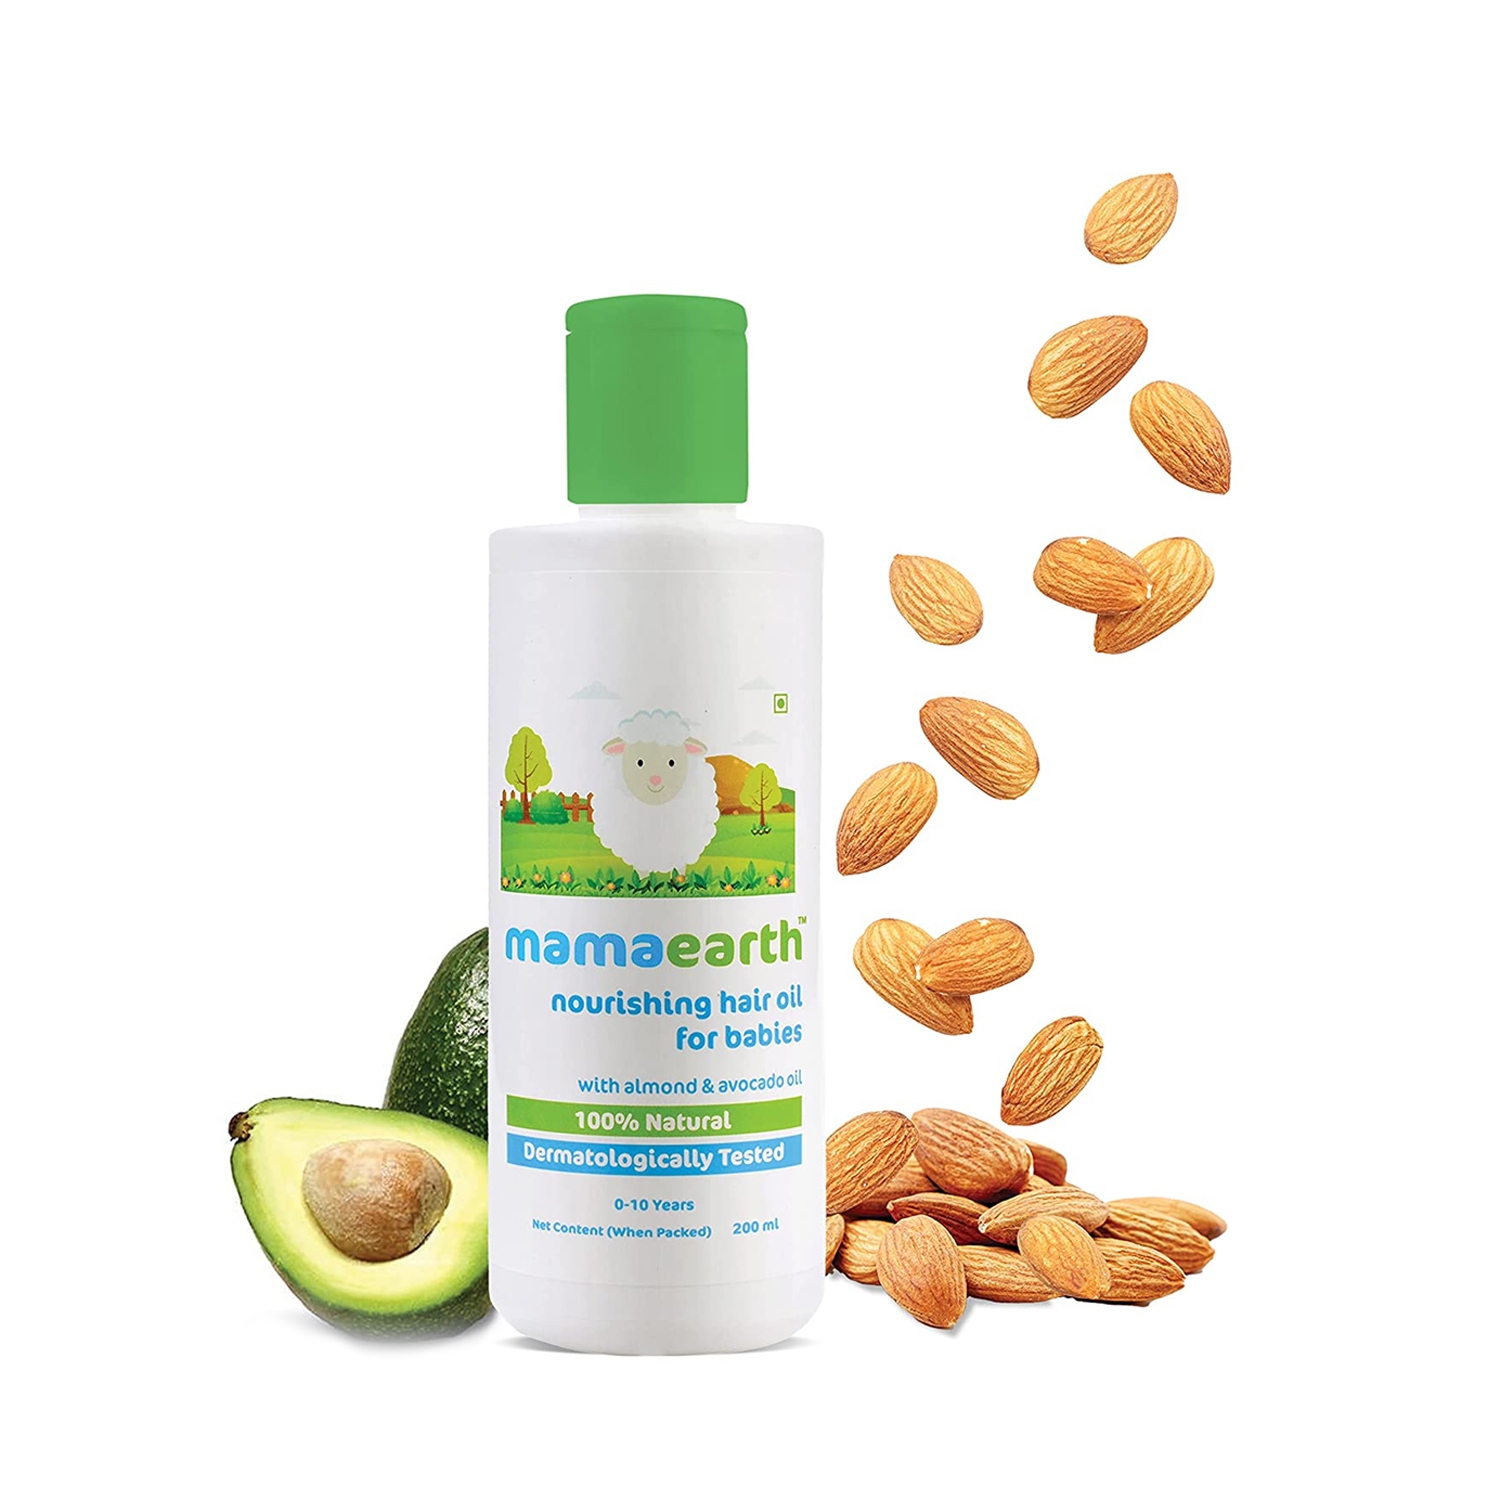 Mamaearth Nourishing Hair Oil for Babies with Almond & Avocado Oil (200ml)